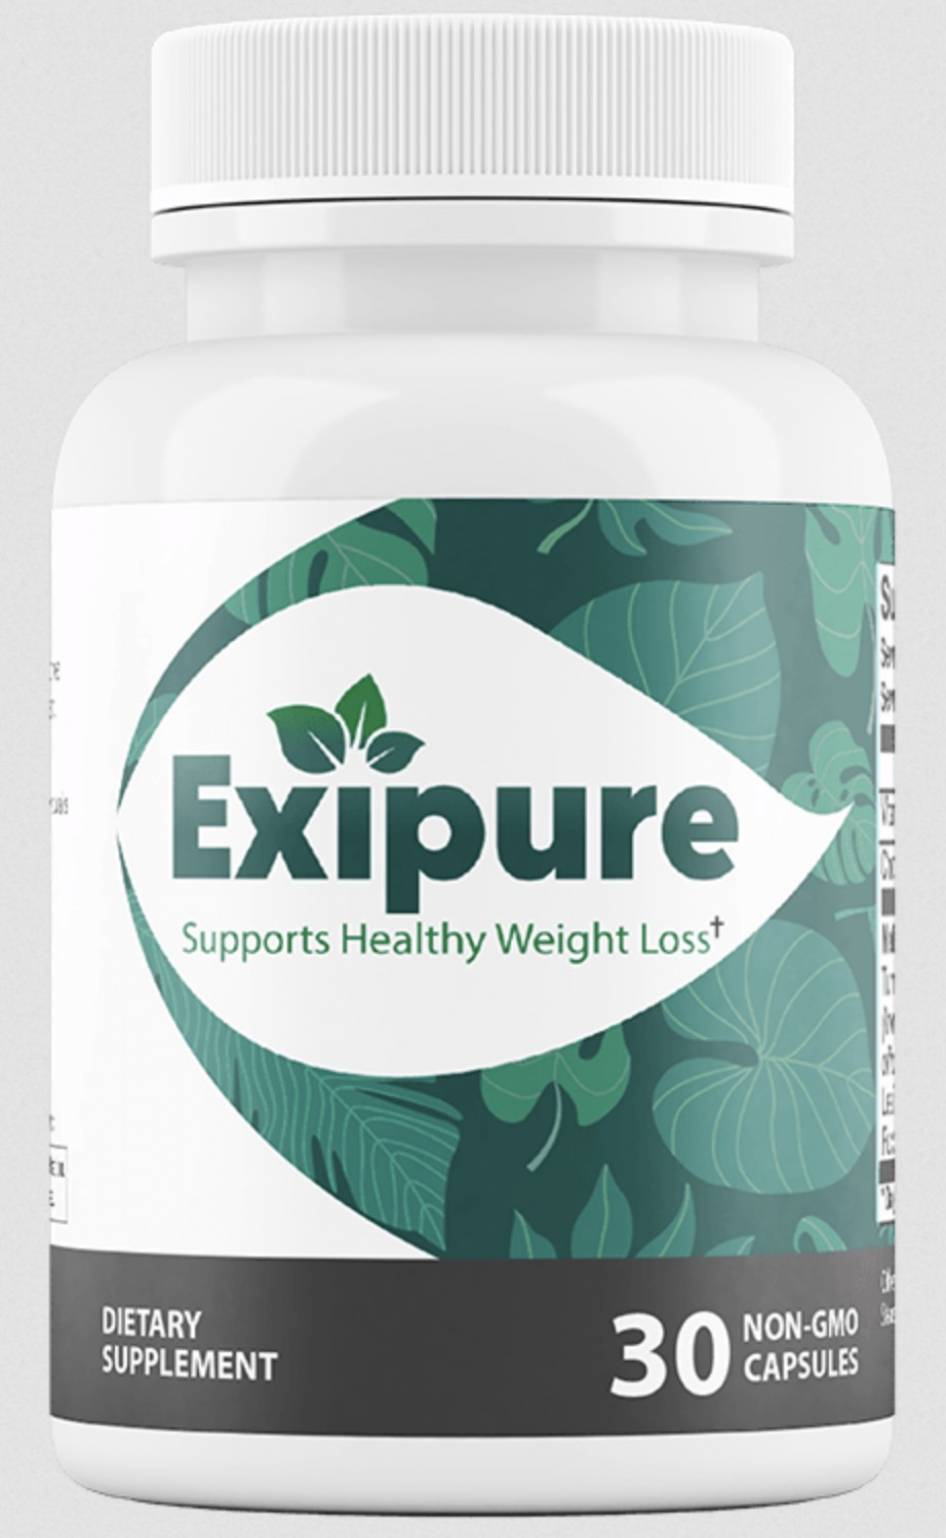 Is Exipure Safe To Use